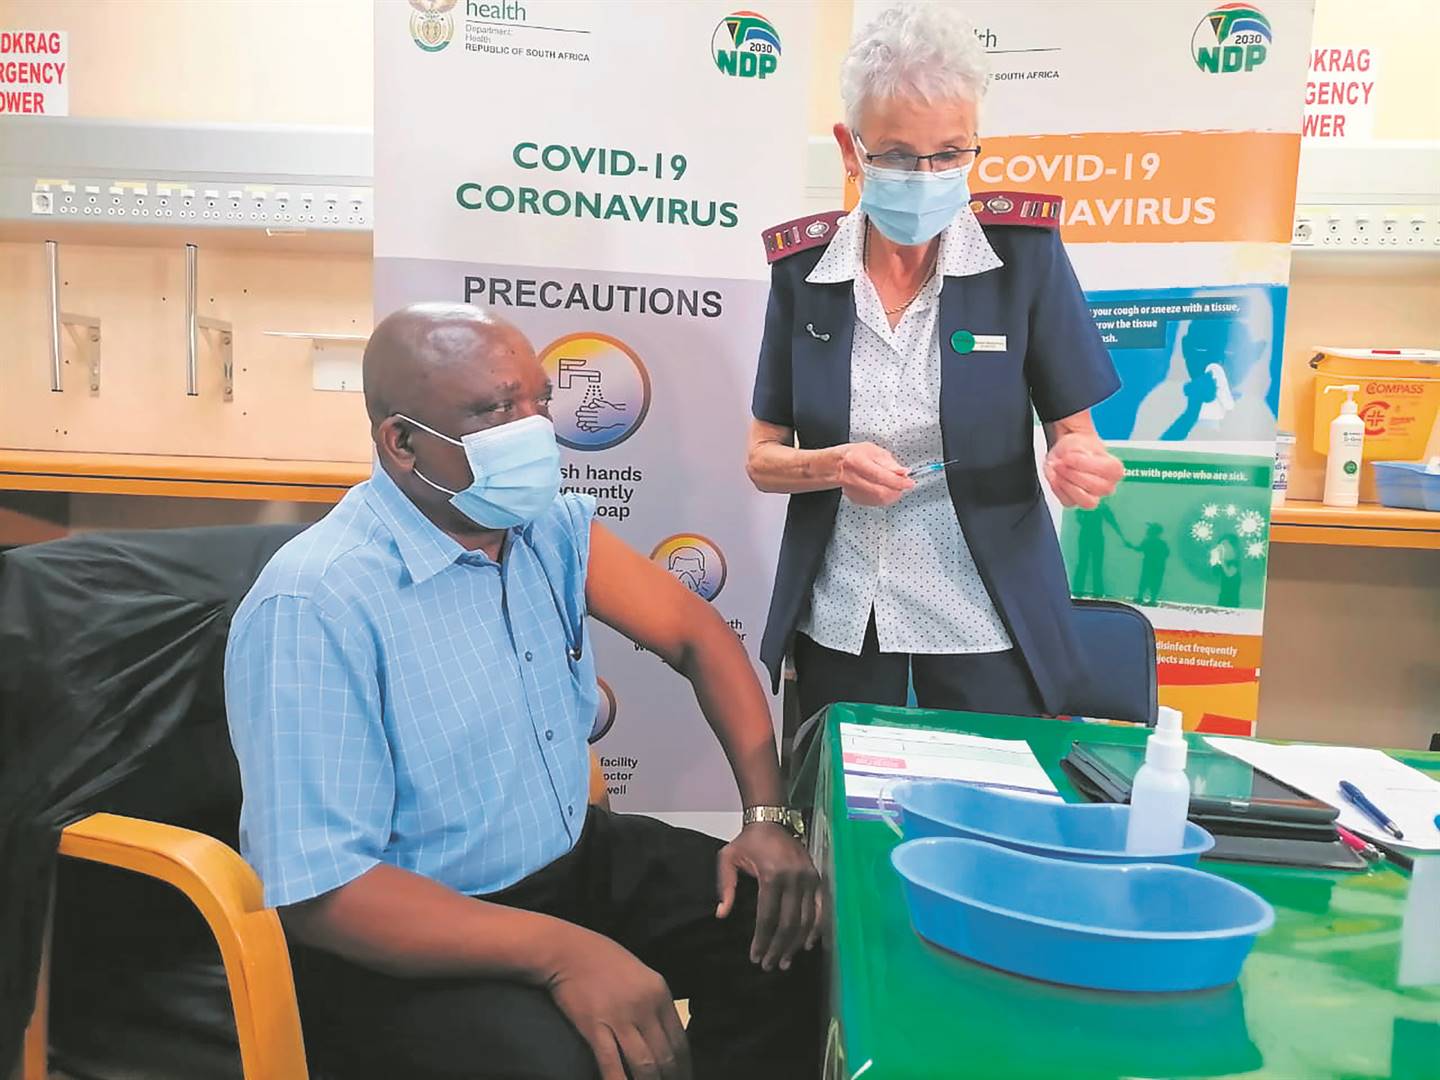 Health Minister Dr Joe Phaahla receiving his Covid-19 J&J booster shot from nurse Mieke Opperman at Zuid Afrikaans Hospital in Tshwane on Tuesday. Photo by Kgomotso Medupe